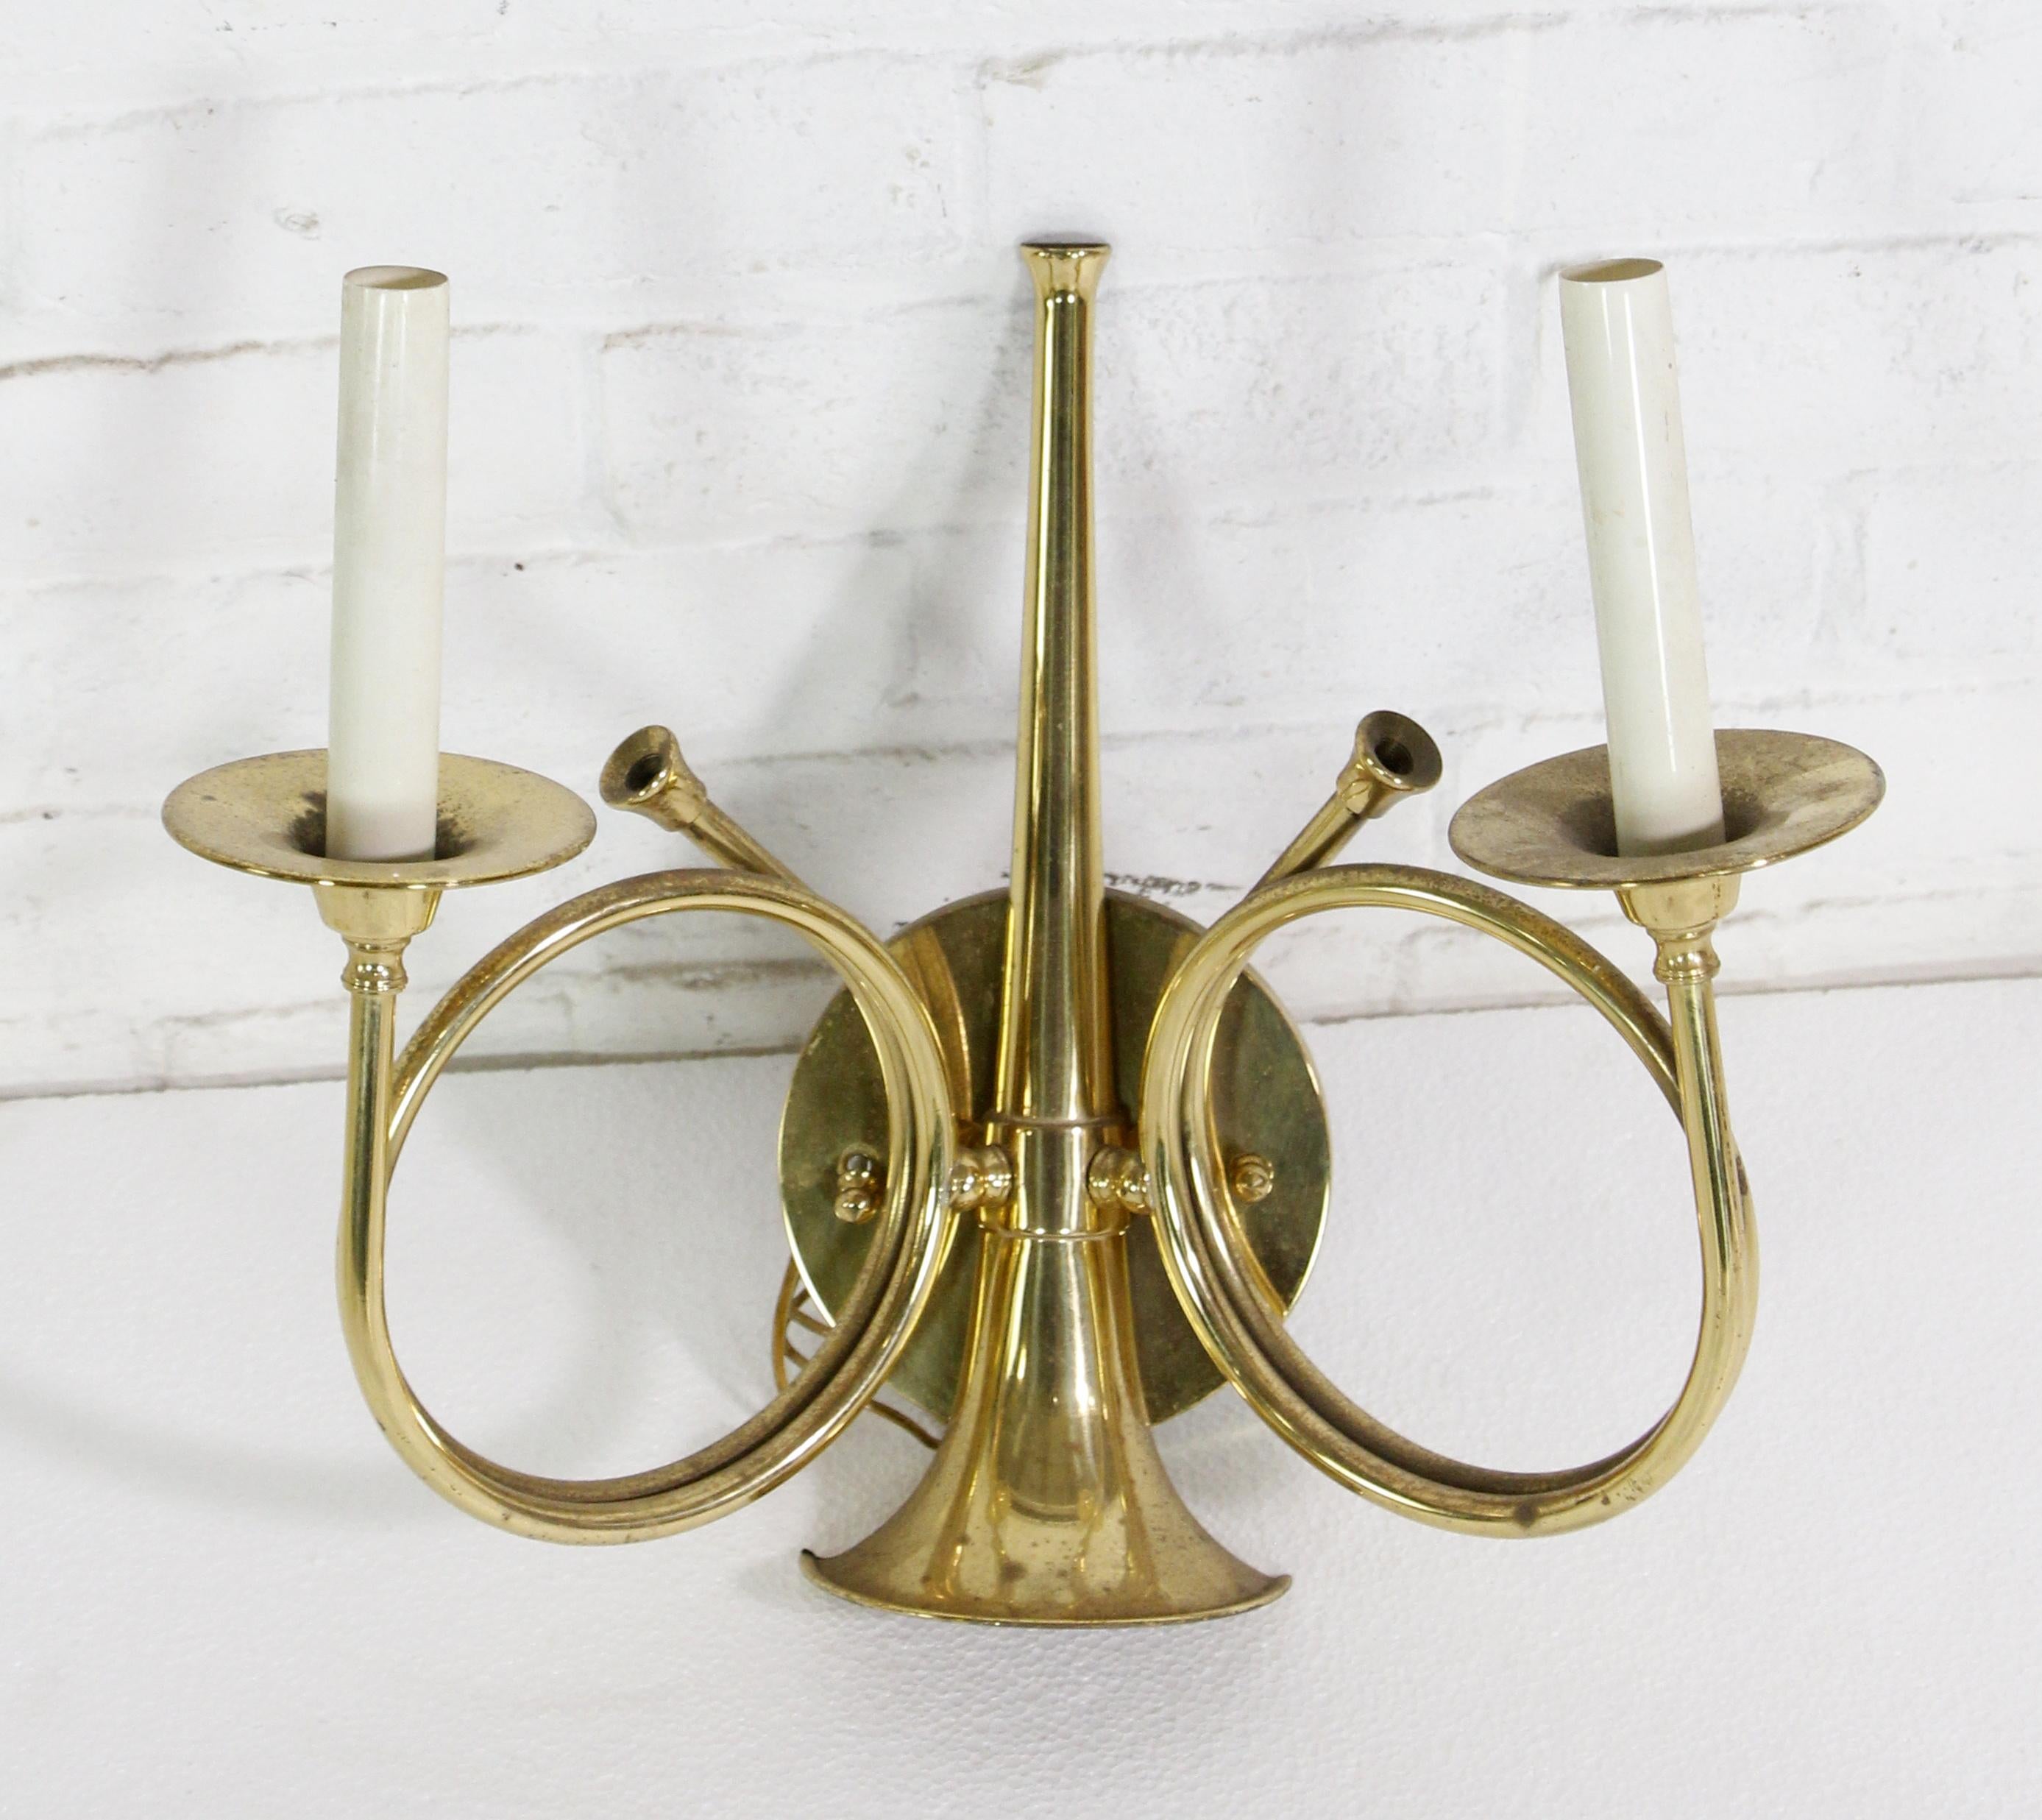 20th Century two arm French trumpet sconce in polished brass. Designed by Frederick Cooper in Chicago. Price includes cleaning and wiring. Small quantity available at time of posting. Priced each. Please inquire. Please note, this item is located in